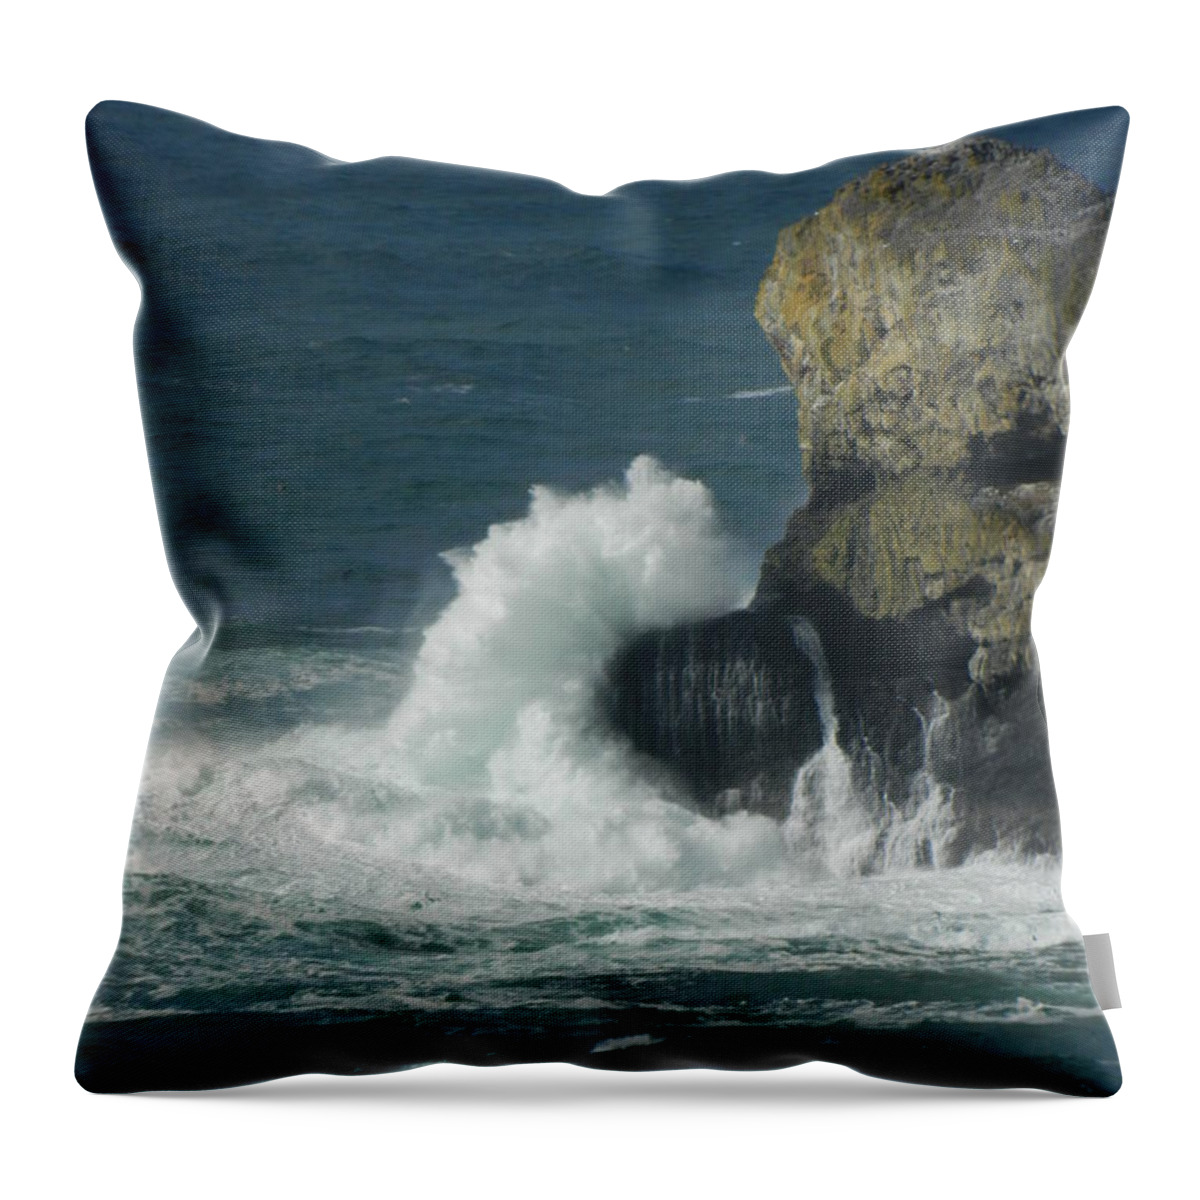 Oregon Throw Pillow featuring the photograph Original Splash by Gallery Of Hope 